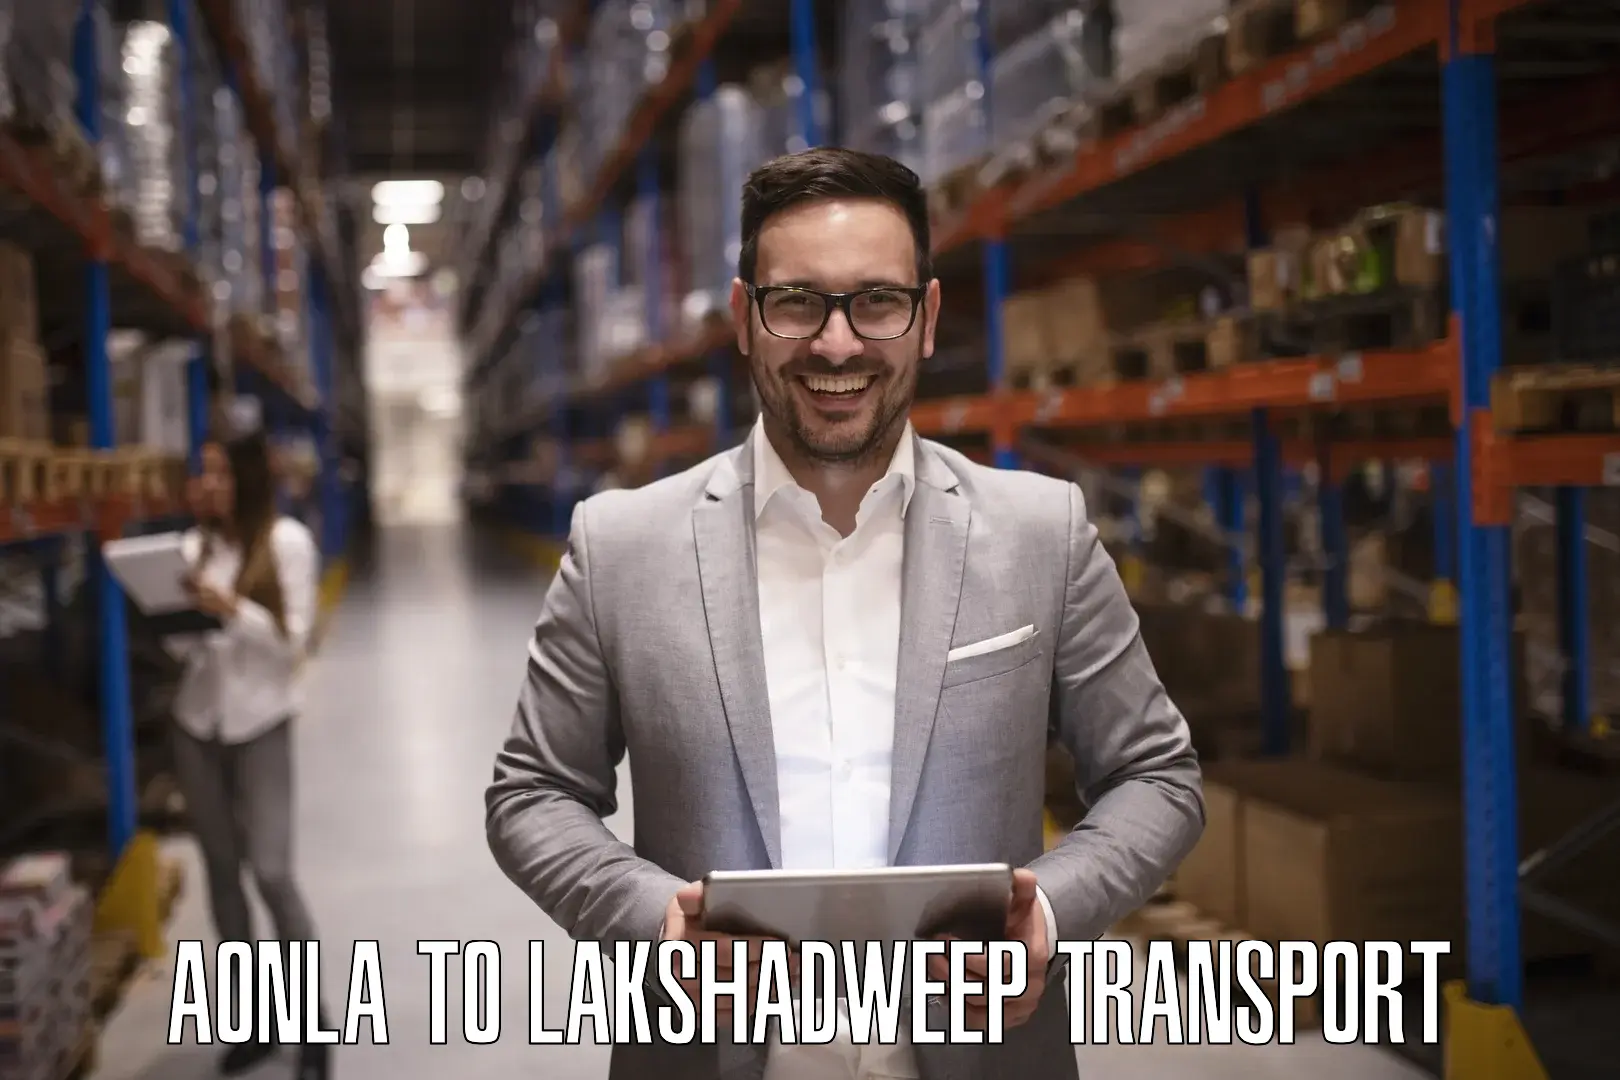 Transport shared services Aonla to Lakshadweep